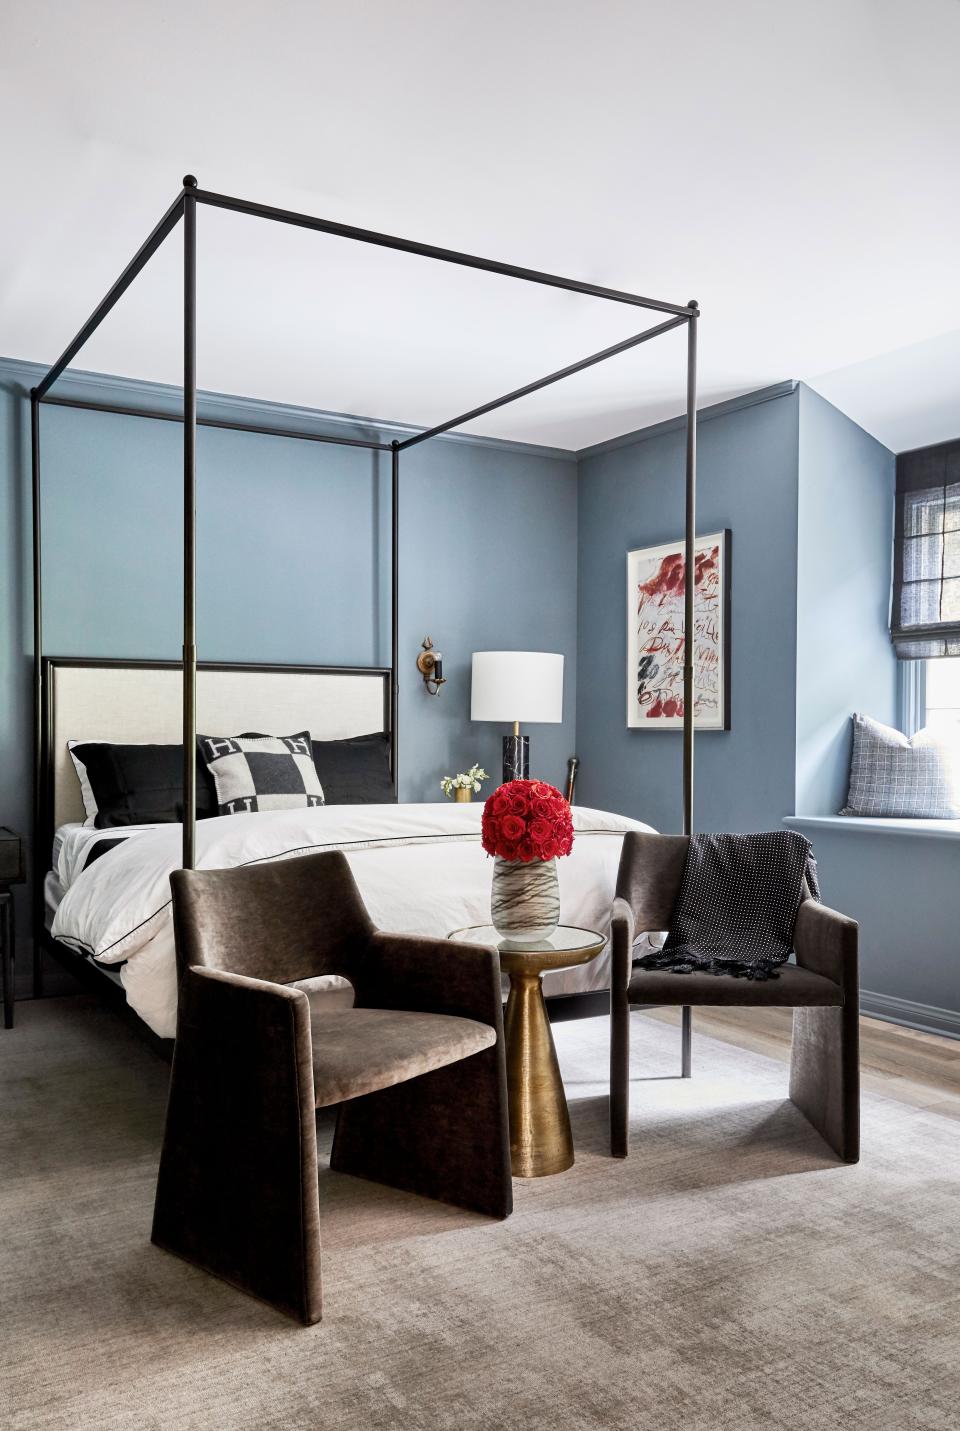 In the guest room, which Nicolas describes as “a little moody,” a lofty RH bed is a focal point alongside velvet CB2 chairs and a Cy Twombly artwork.